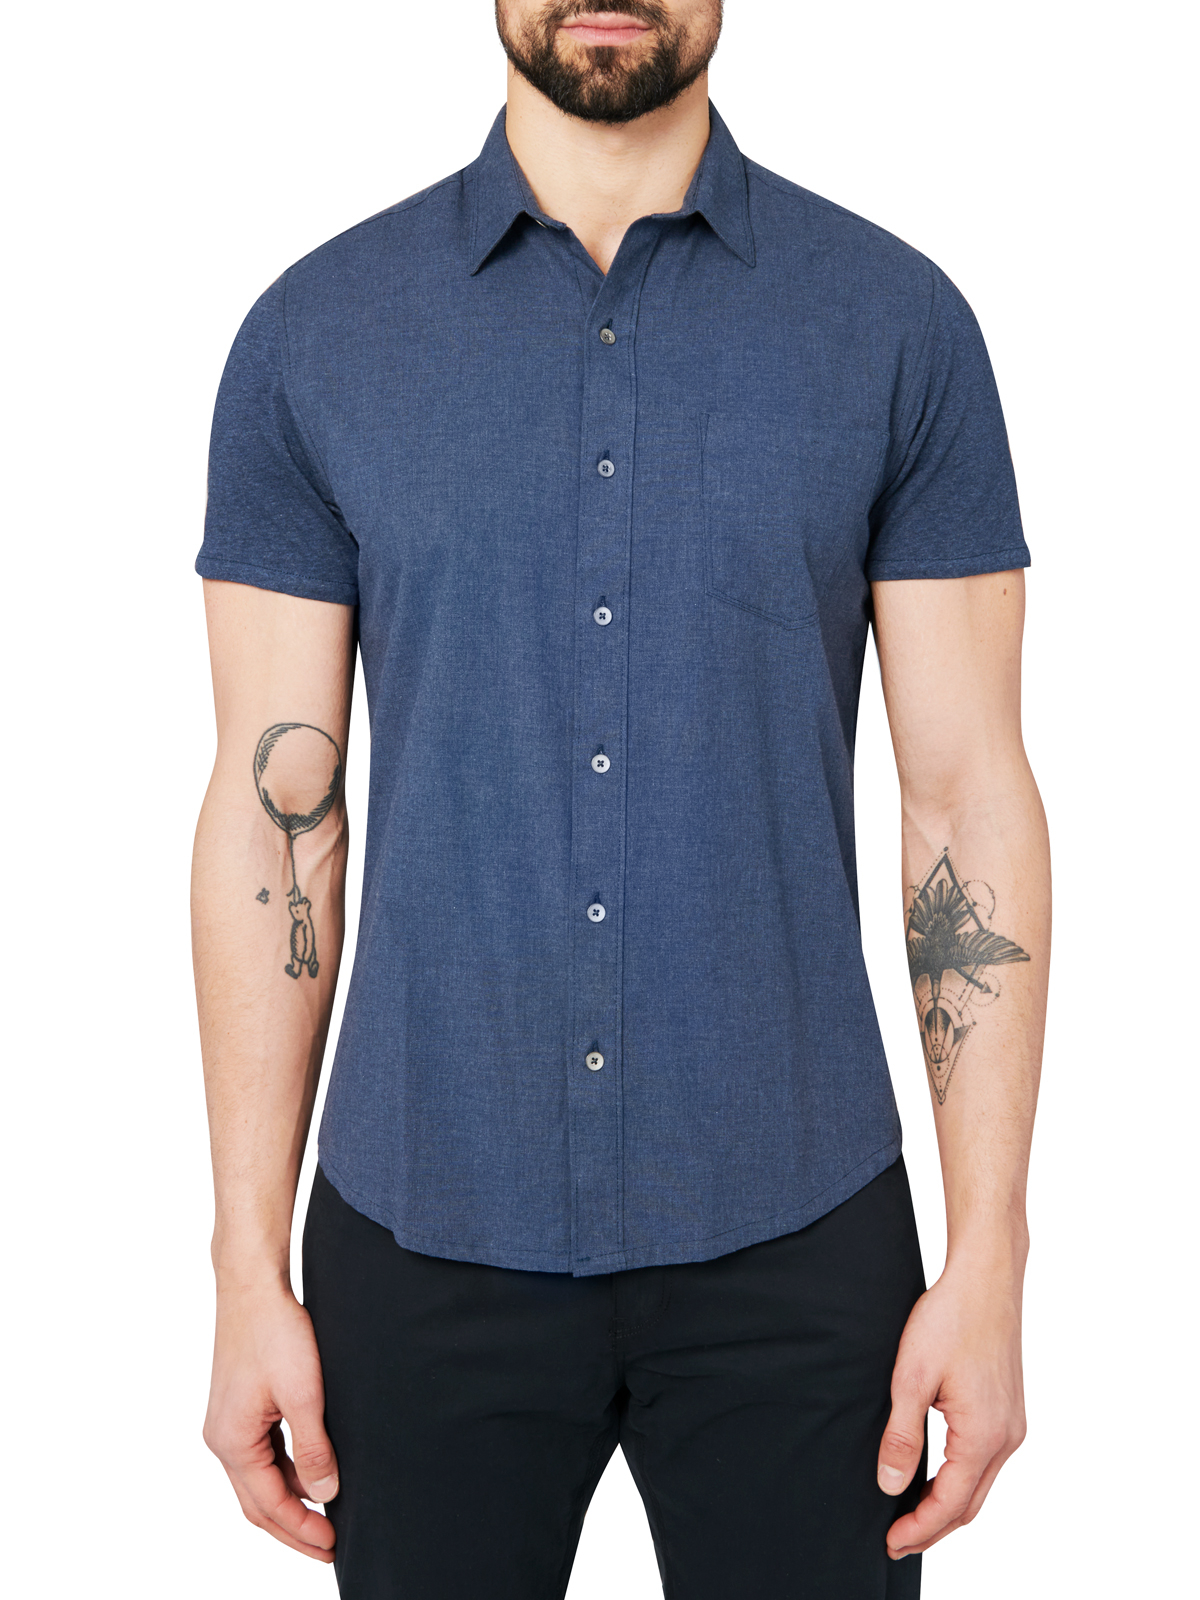 SOLID HEATHER REWORKED SHIRT